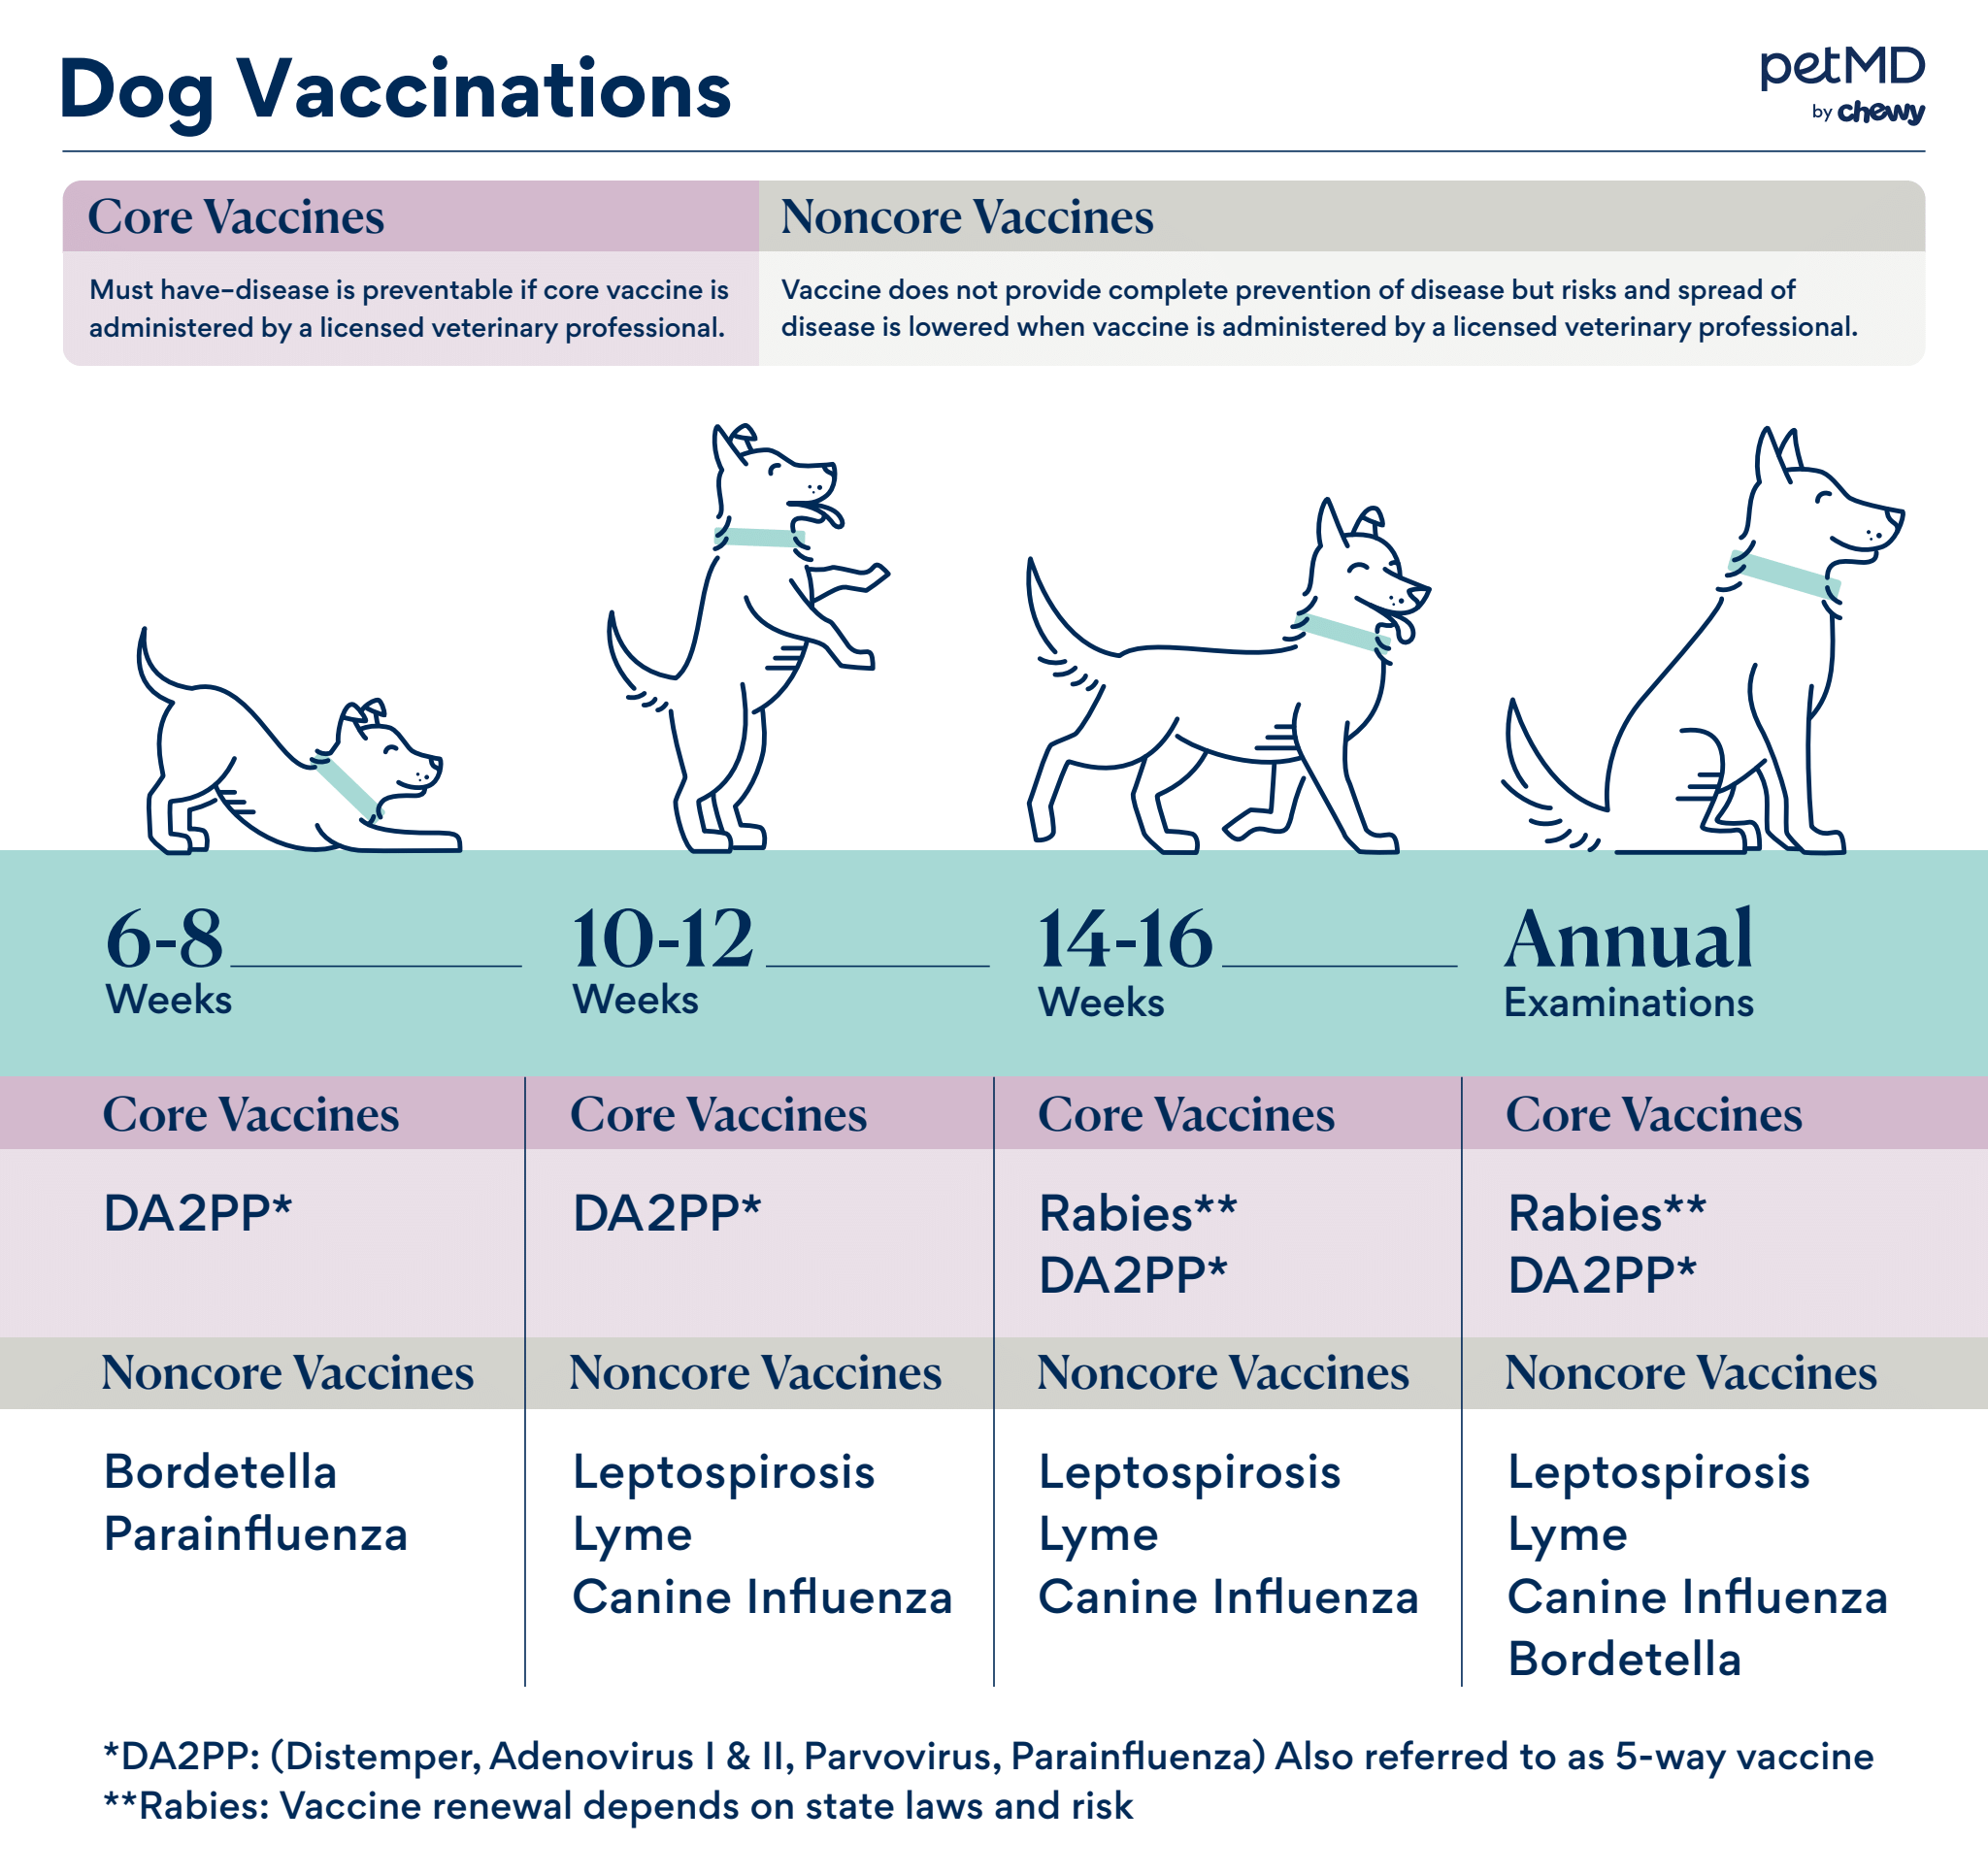 https://www.petmd.com/dog/care/dog-vaccinations-for-every-lifestage